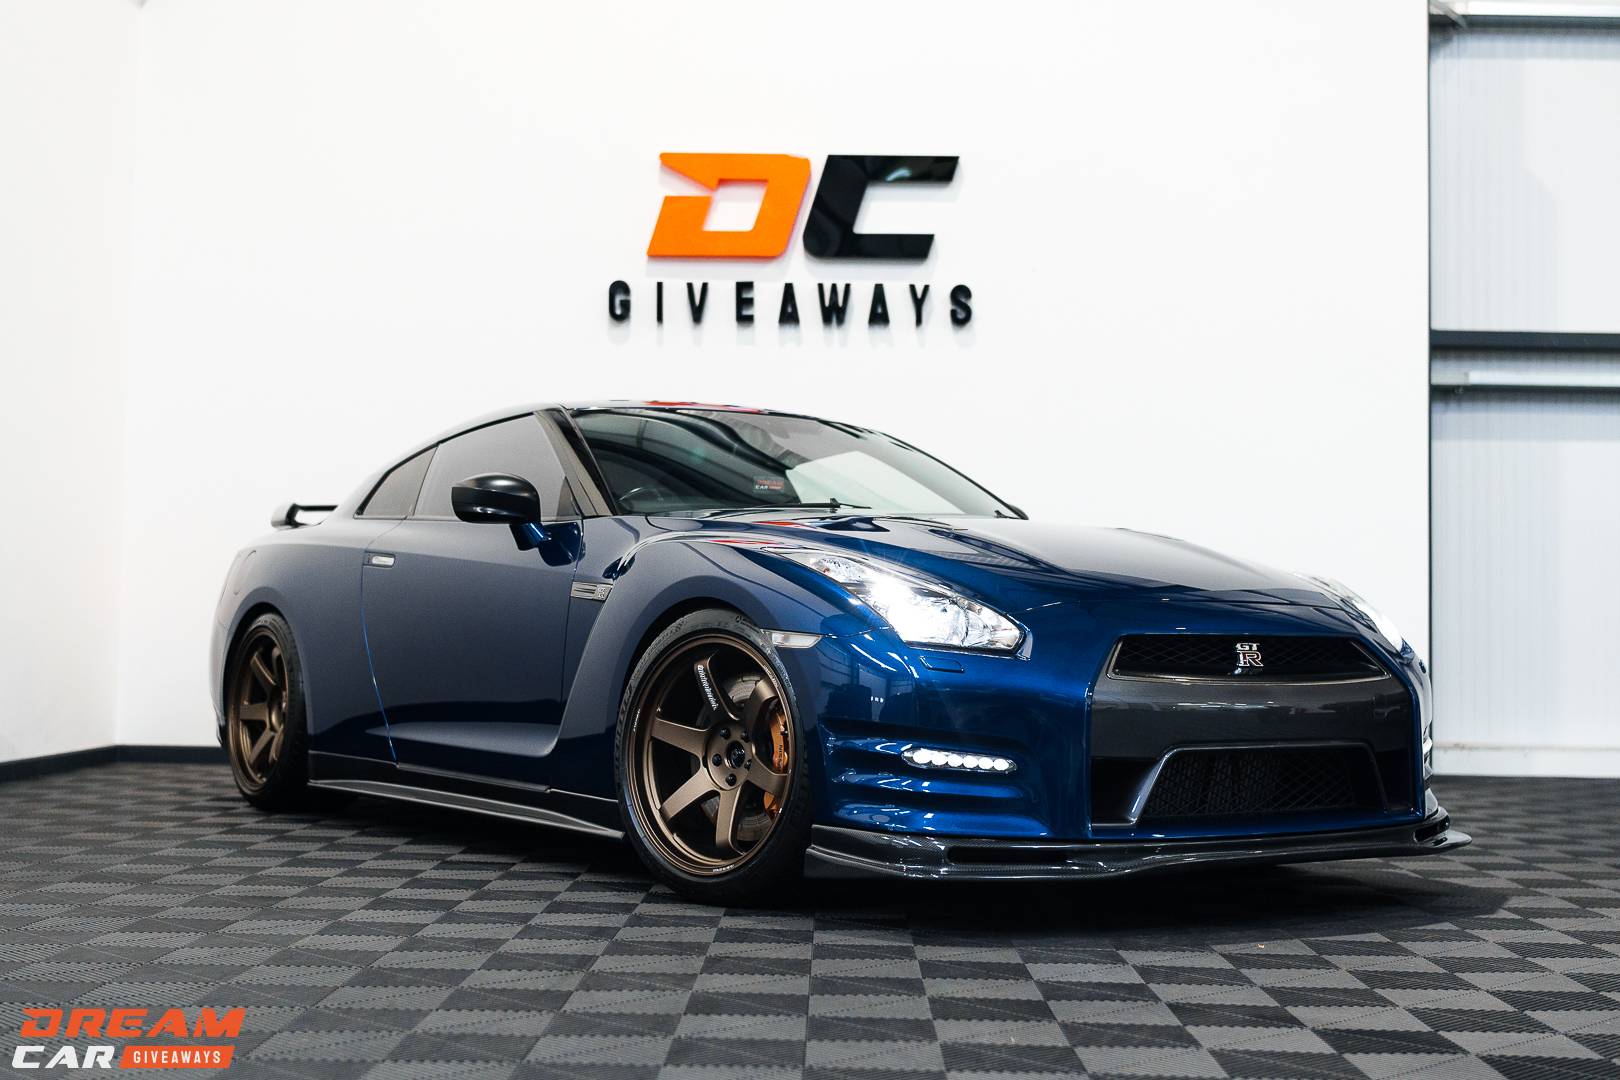 Win this Nissan R35 GTR LM800